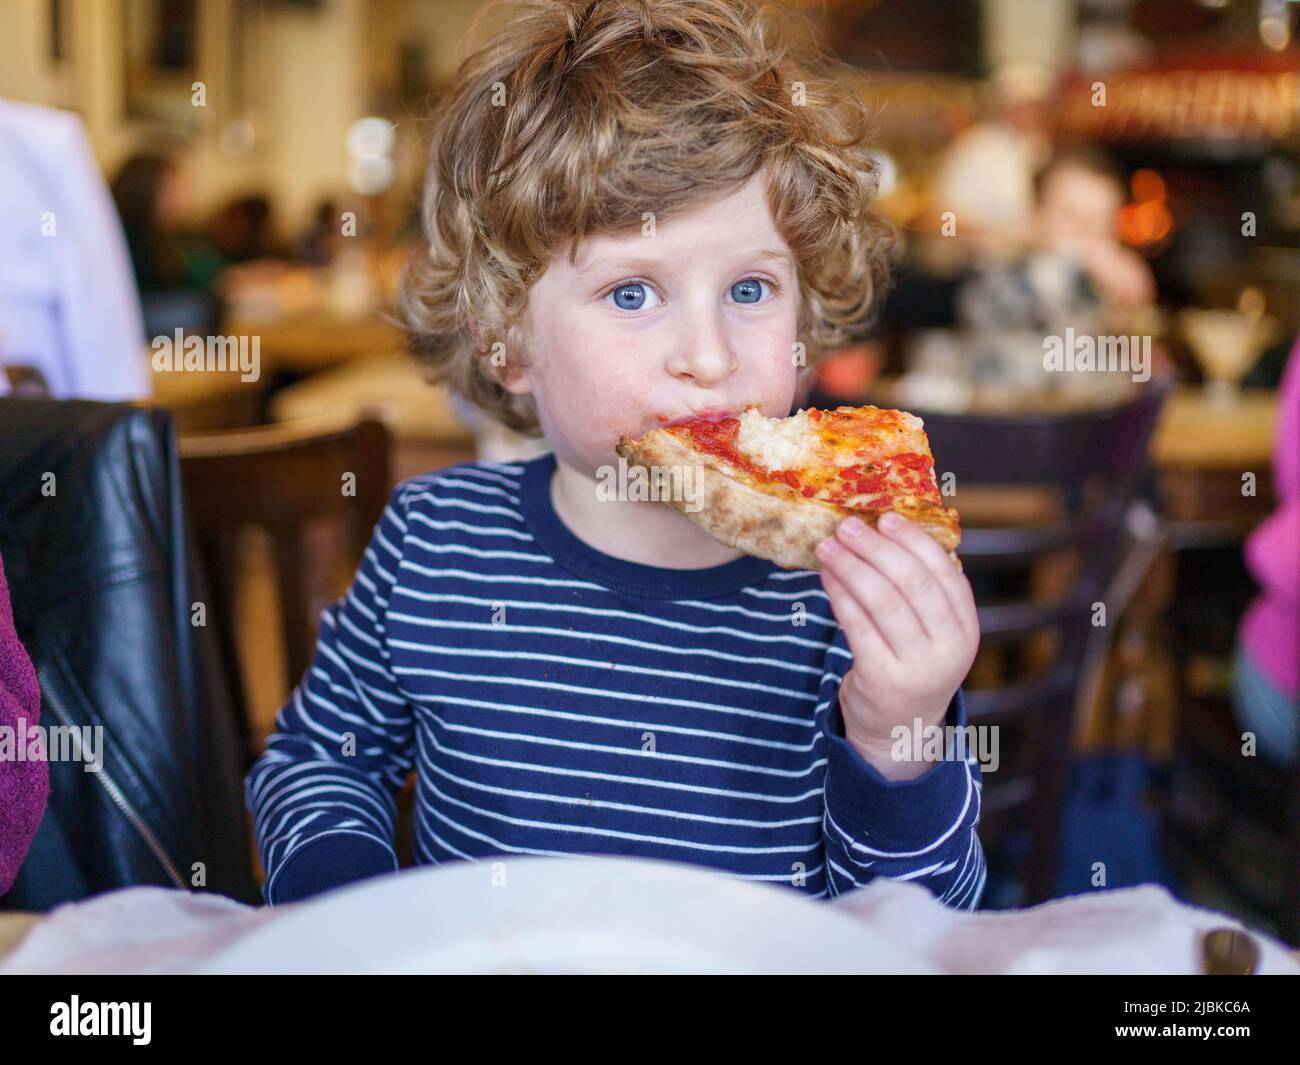 Young three year old boy eating pizza slice at Italian restaurant, UK Stock Photo